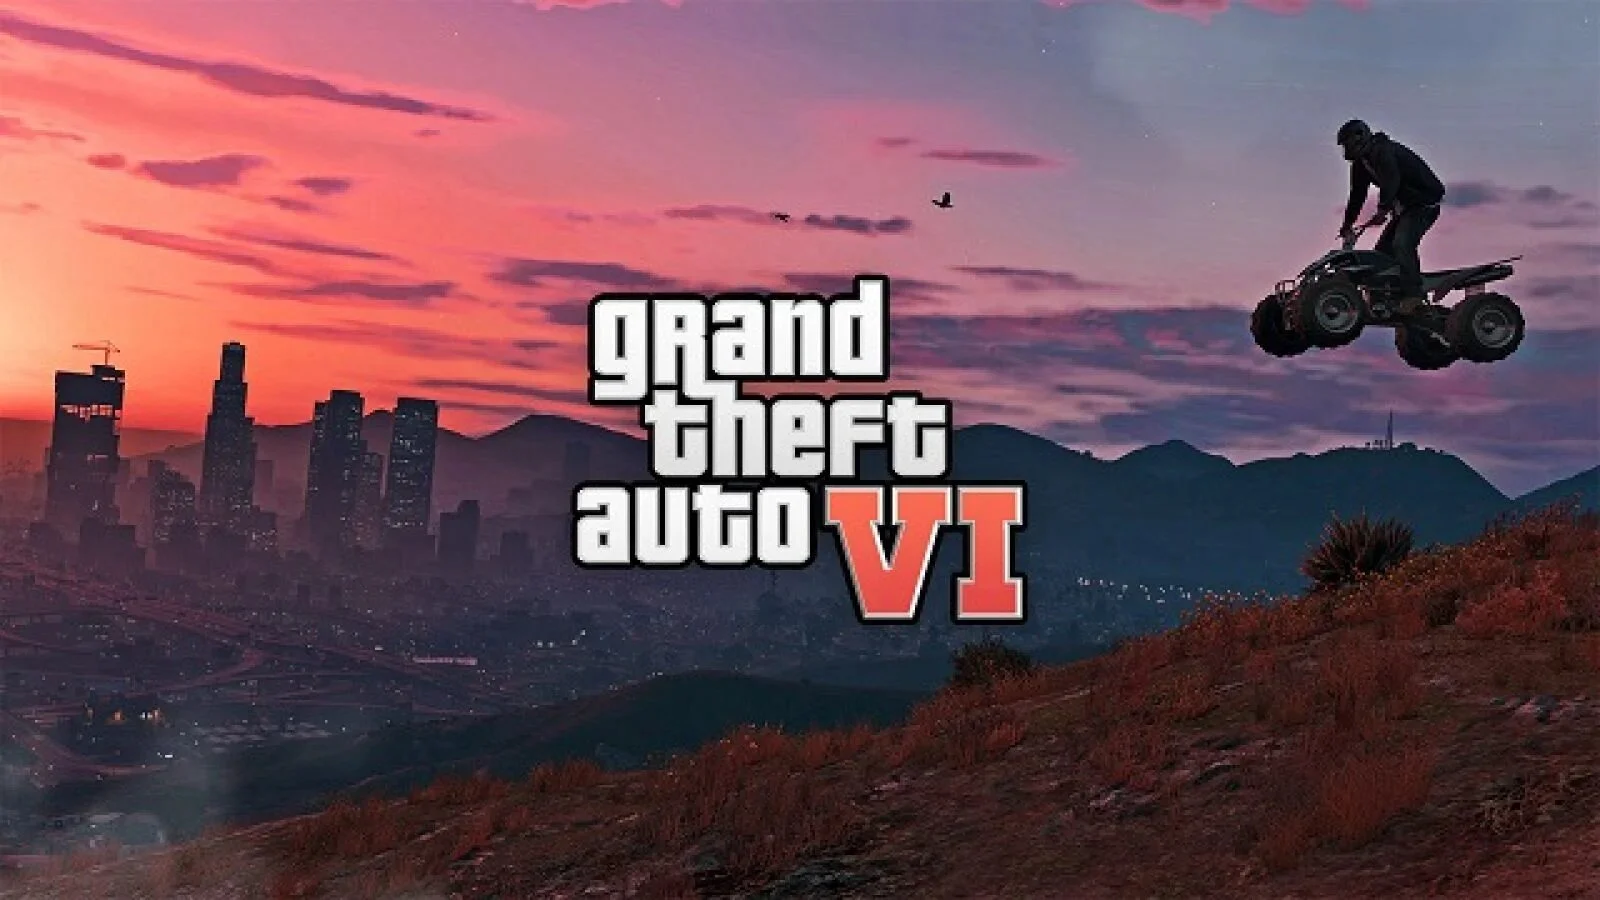 An insider reported a possible reason for the lack of announcement of GTA 6